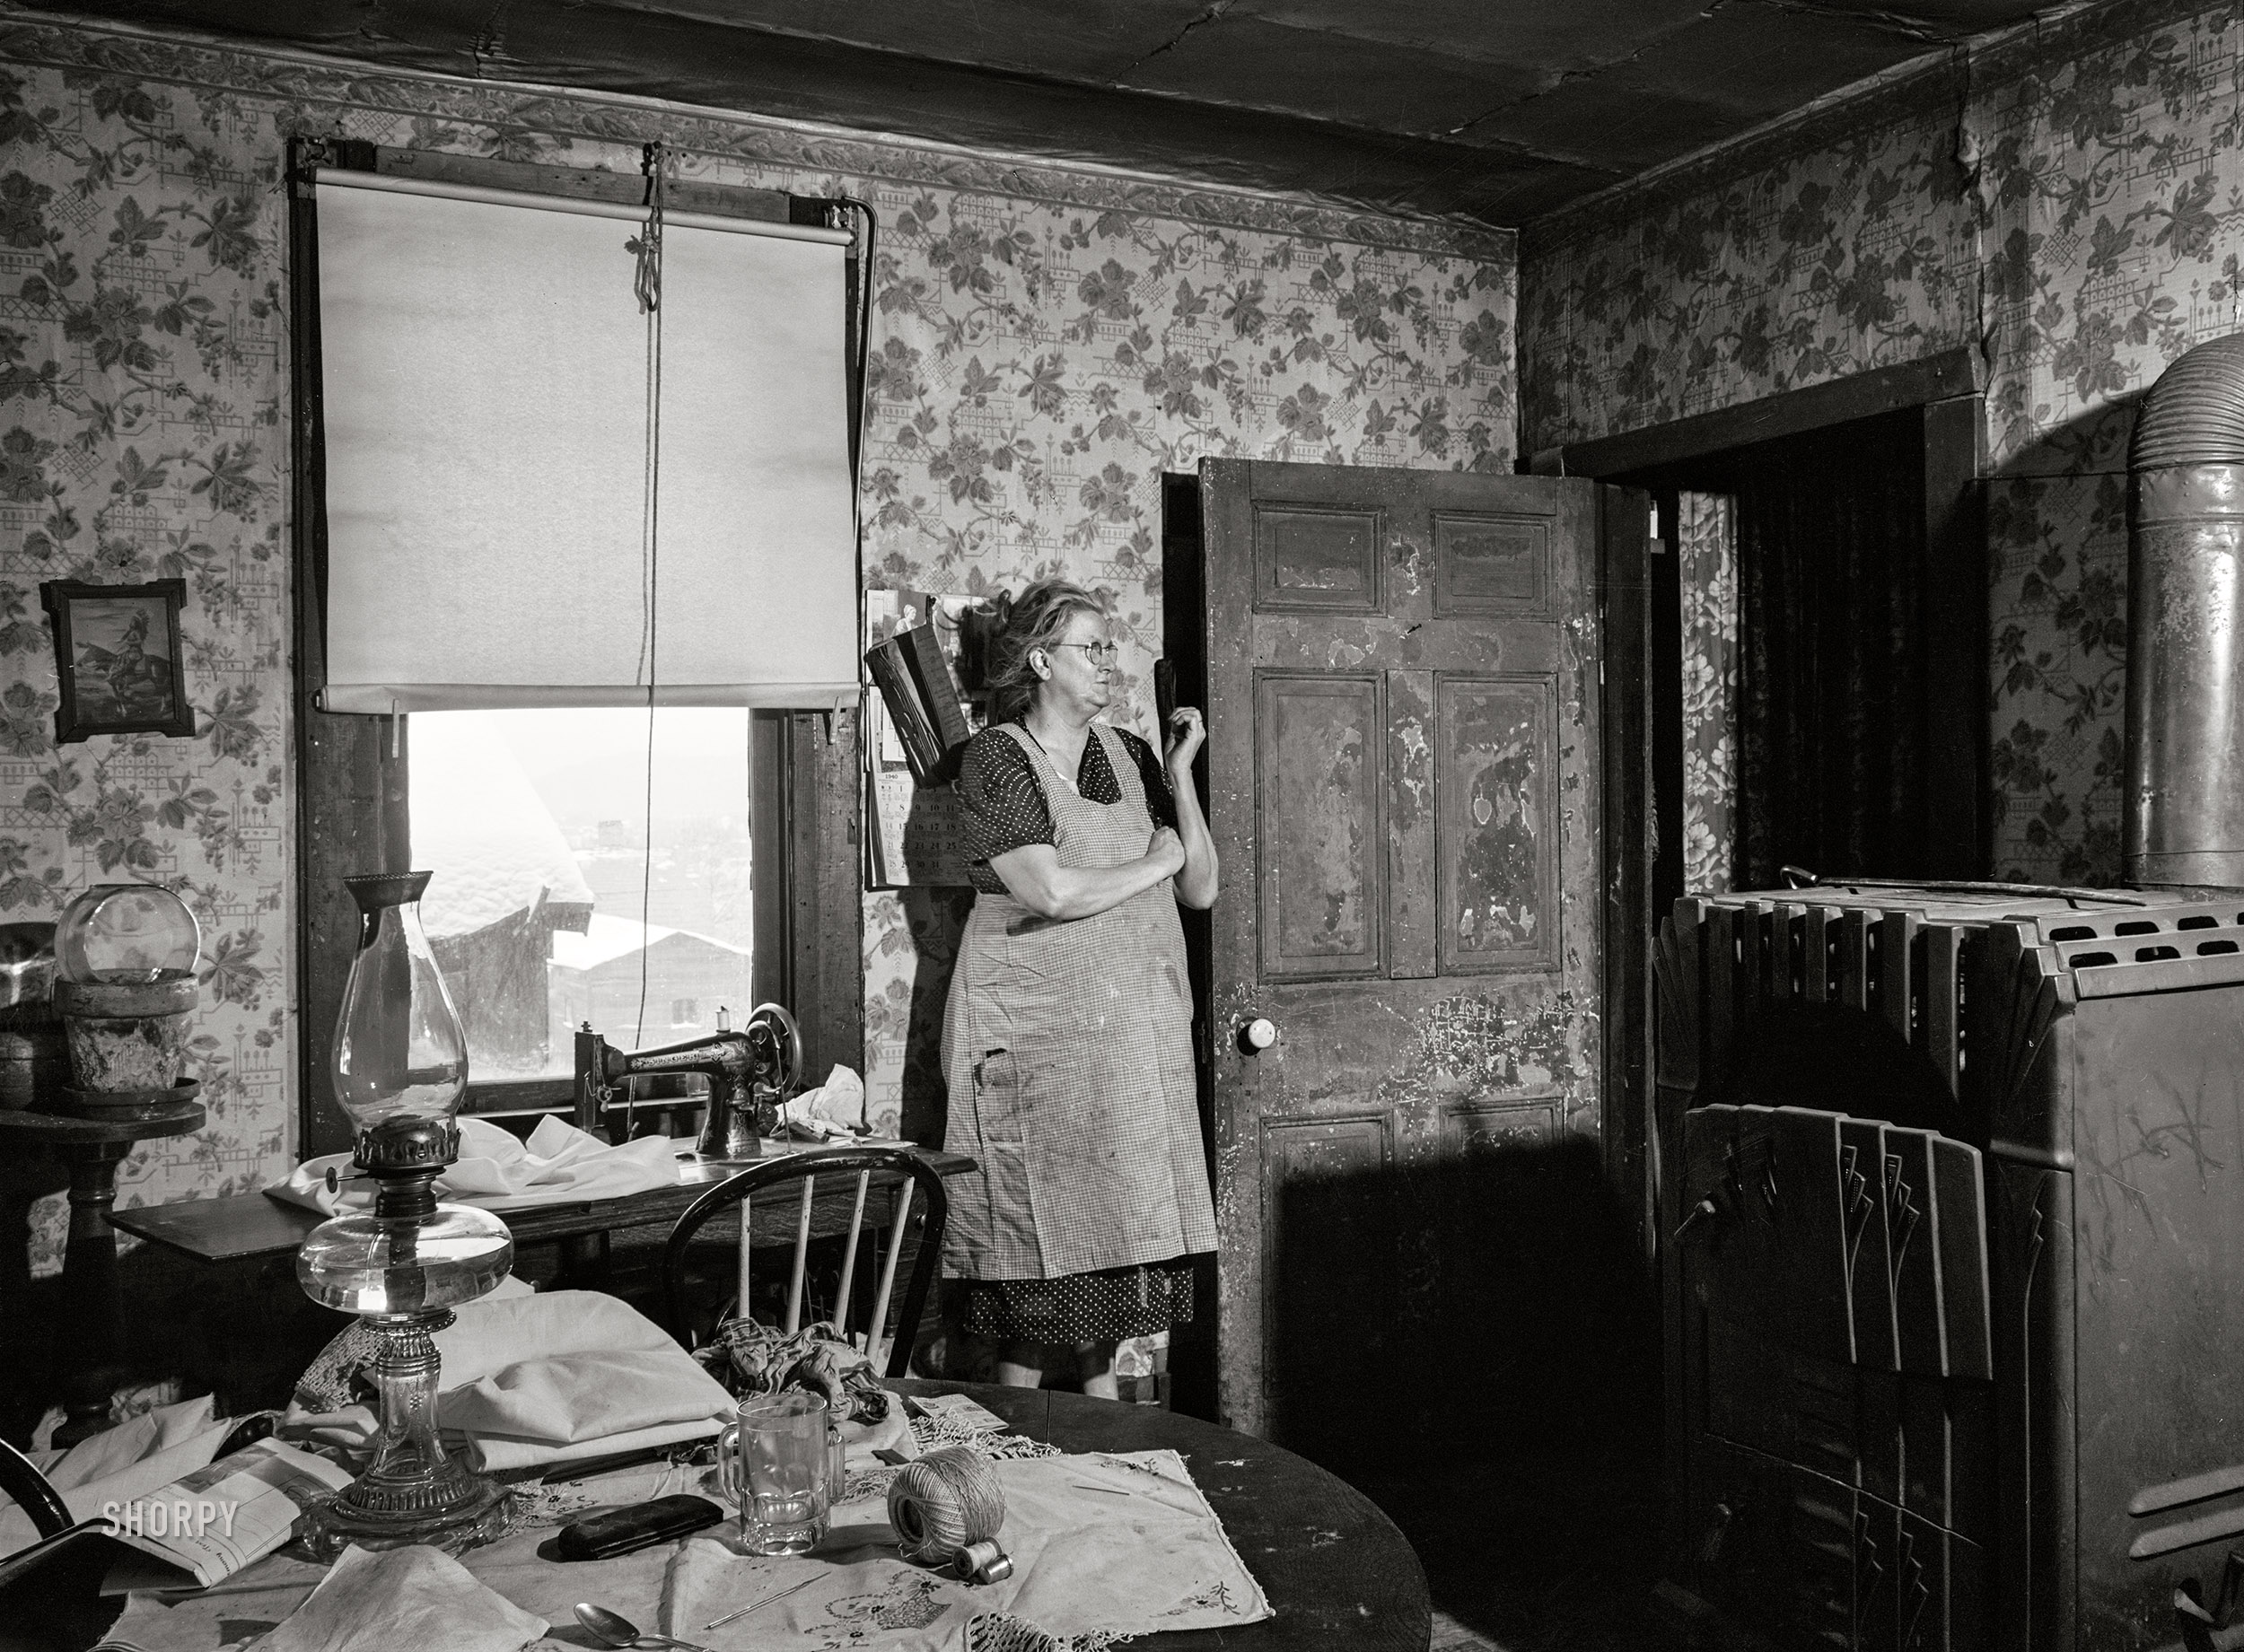 January 1940. "Woman in dilapidated old house in the Mount Washington district of Beaver Falls, Pennsylvania. She is blind in one eye and her other one is going bad too. She expressed the hope that she would lose her sight completely so she could get some money from blind pension." Medium format acetate negative by Jack Delano. View full size.